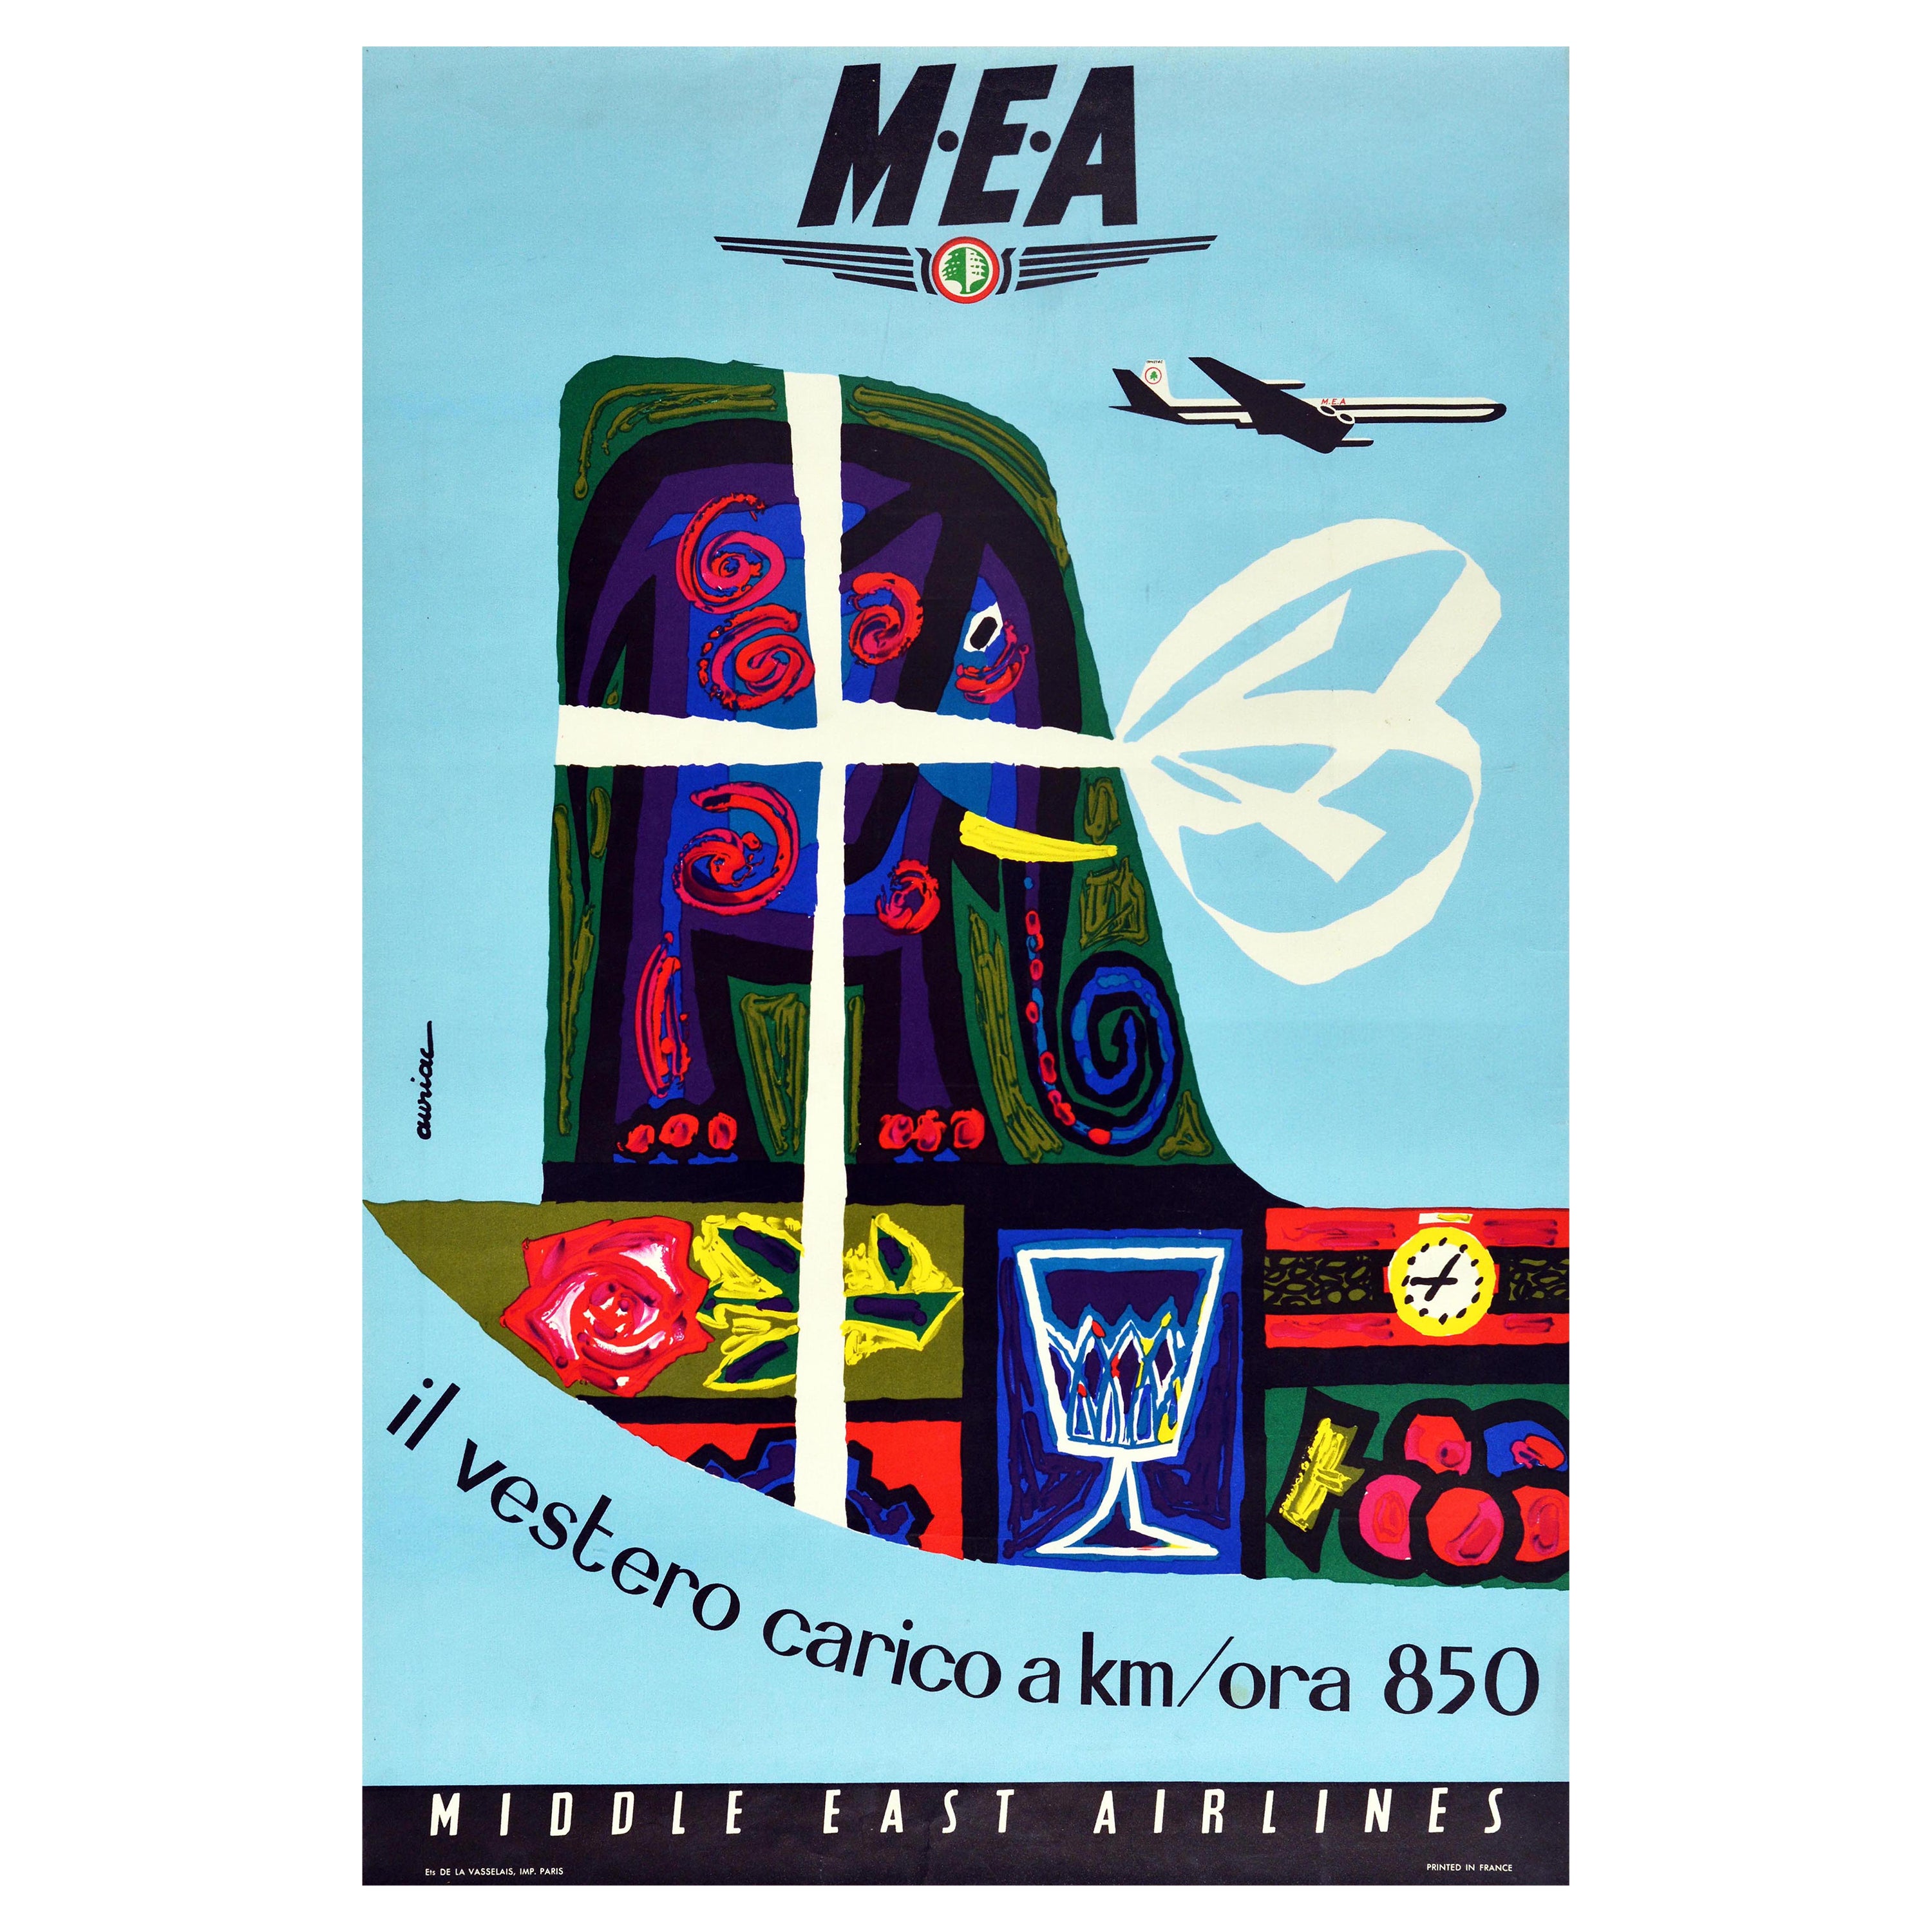 Original Vintage Advertising Poster Middle East Airlines MEA Cargo Plane 850km/h